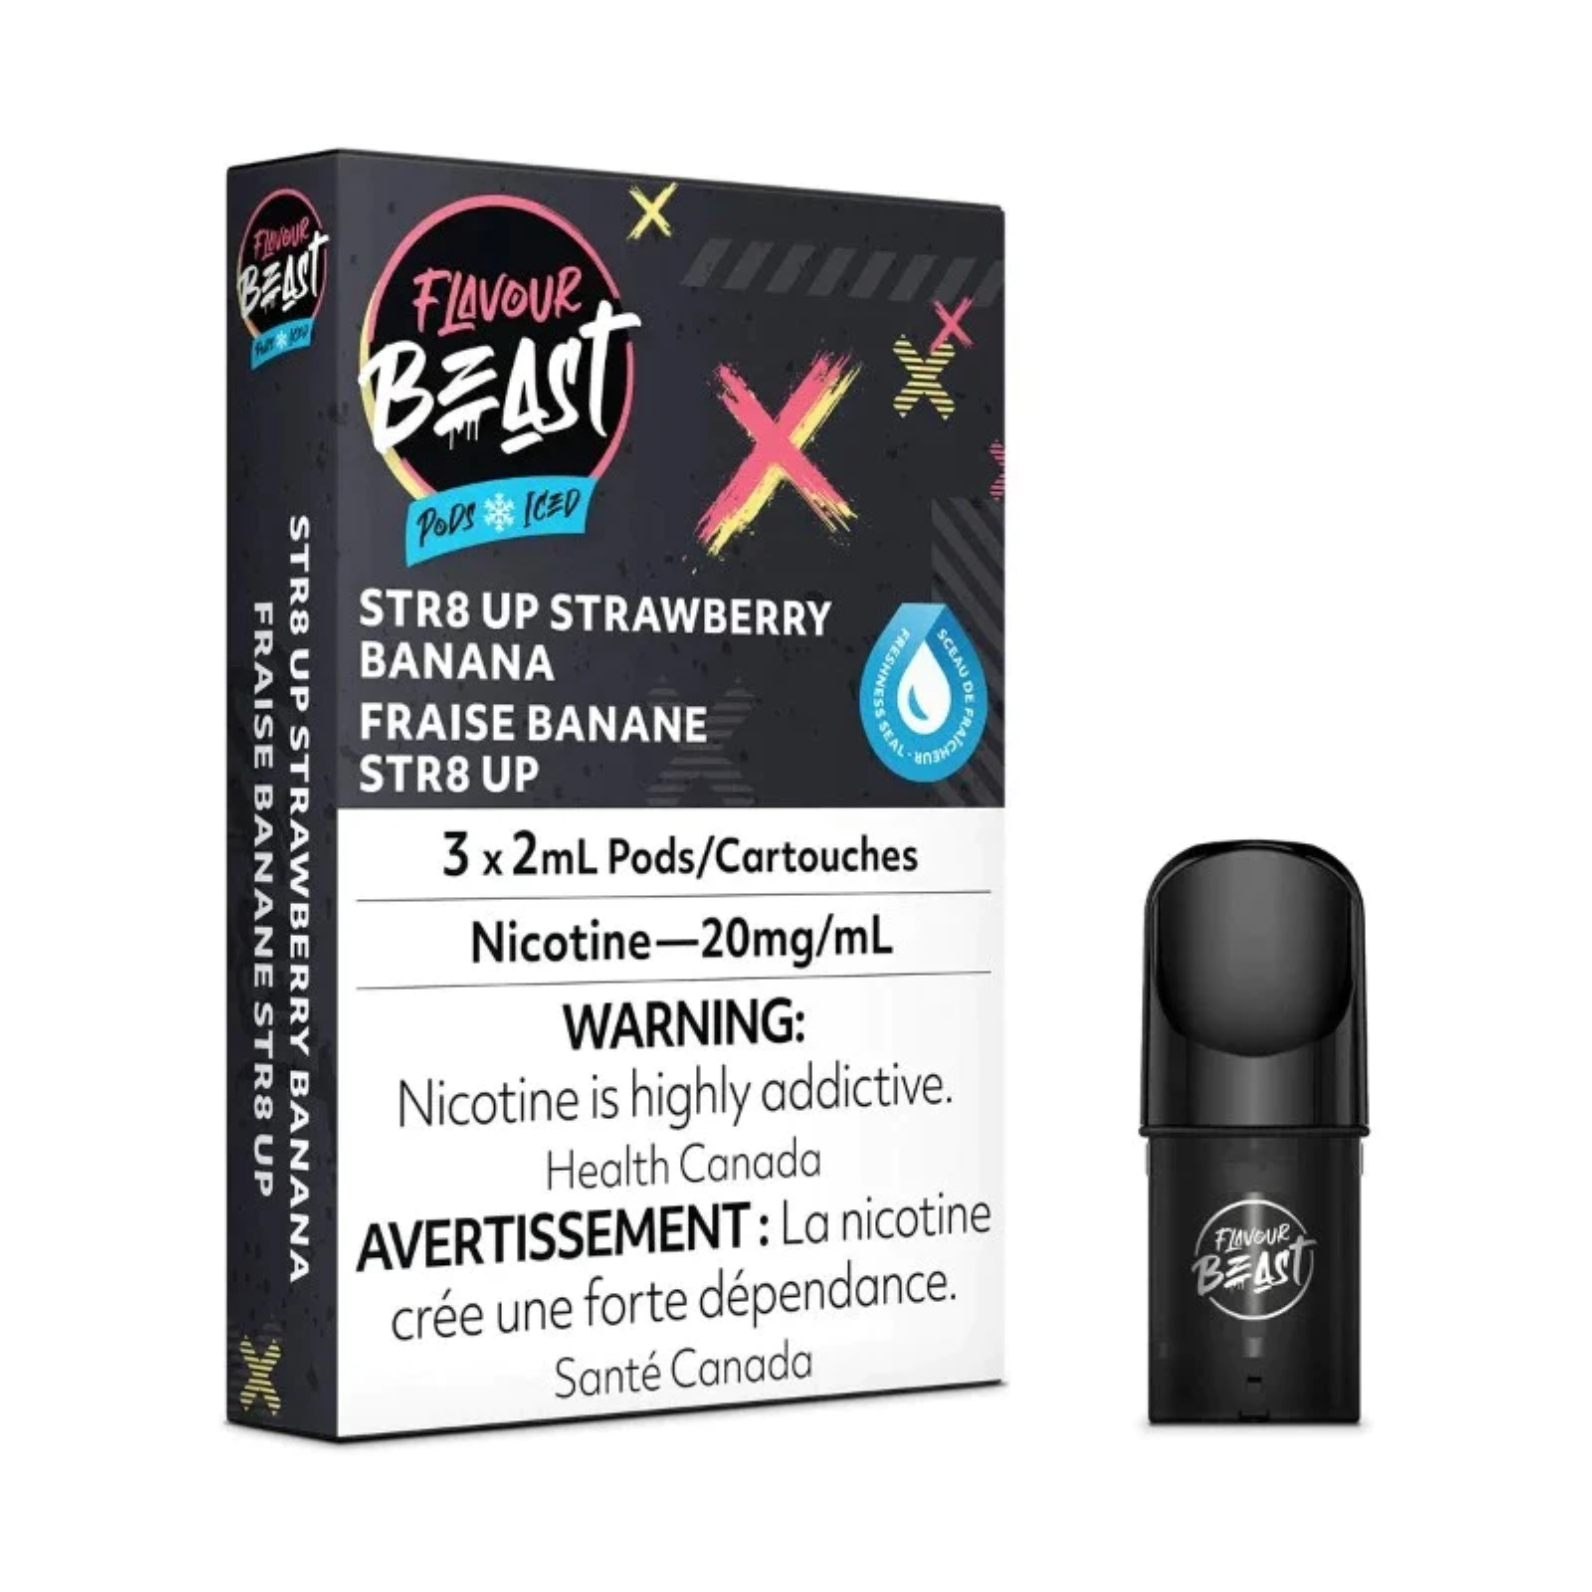 Flavour Beast Pods - Str8 Up Strawberry Banana Iced